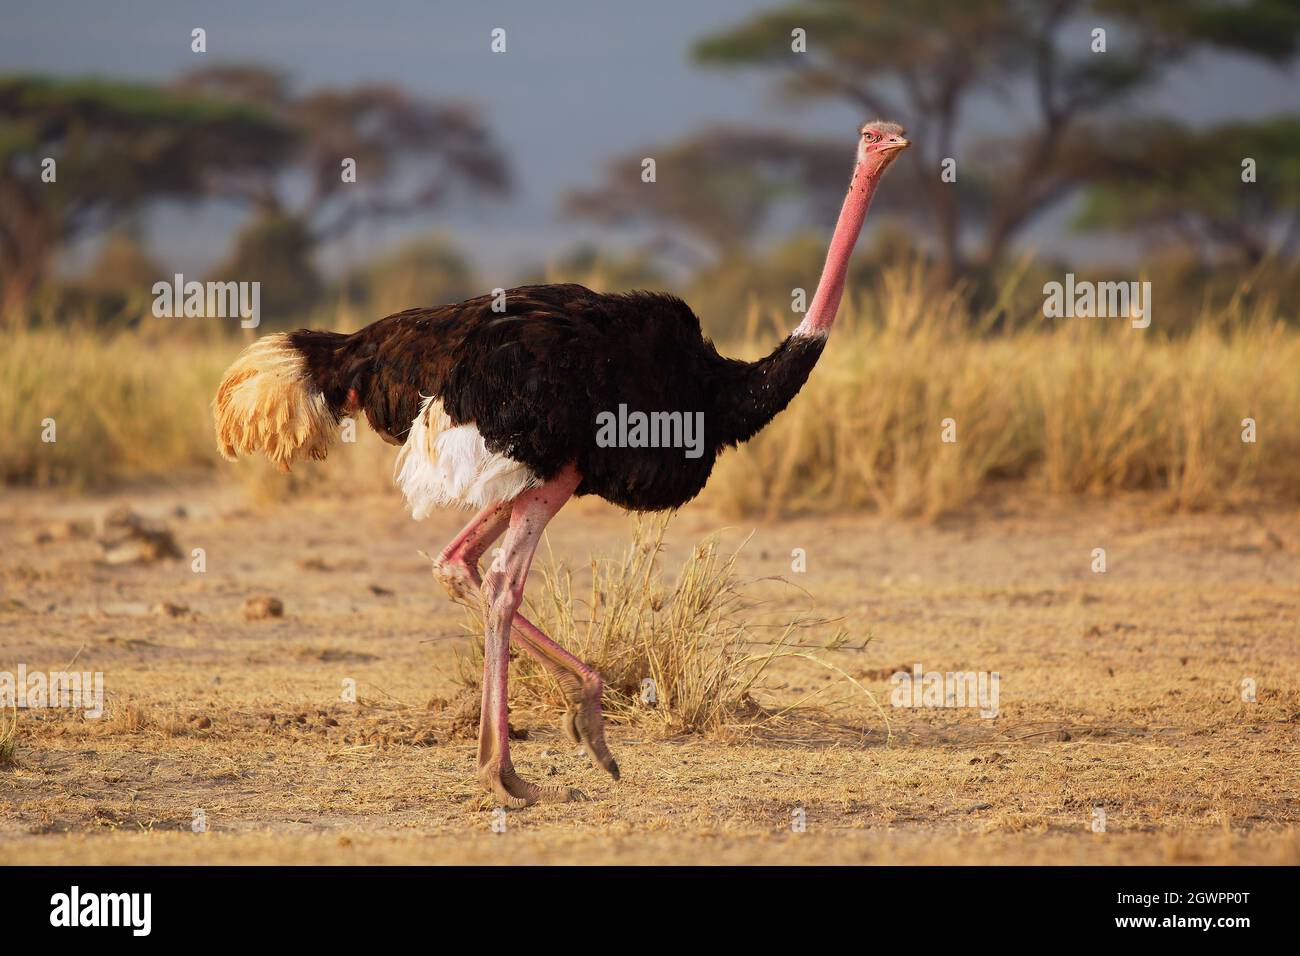 Common Ostrich - Struthio camelus is a species of flightless bird native to large areas of Africa , the largest living bird, long strong red legs, lon Stock Photo